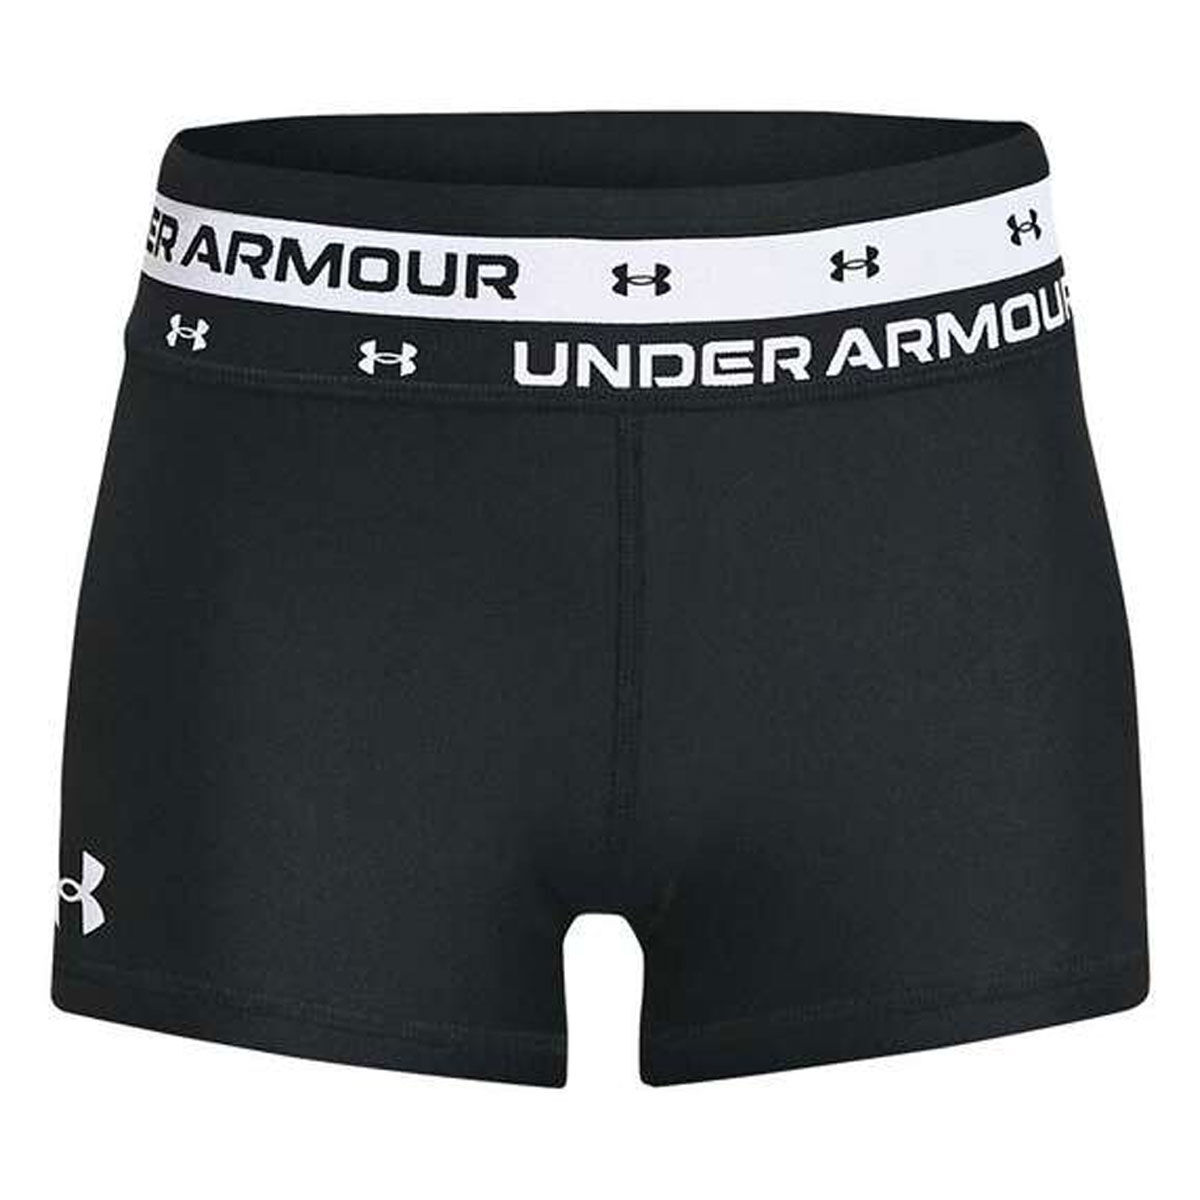  Under Armour Men's HeatGear Armour Mid Compression Shorts SM  Black : Clothing, Shoes & Jewelry